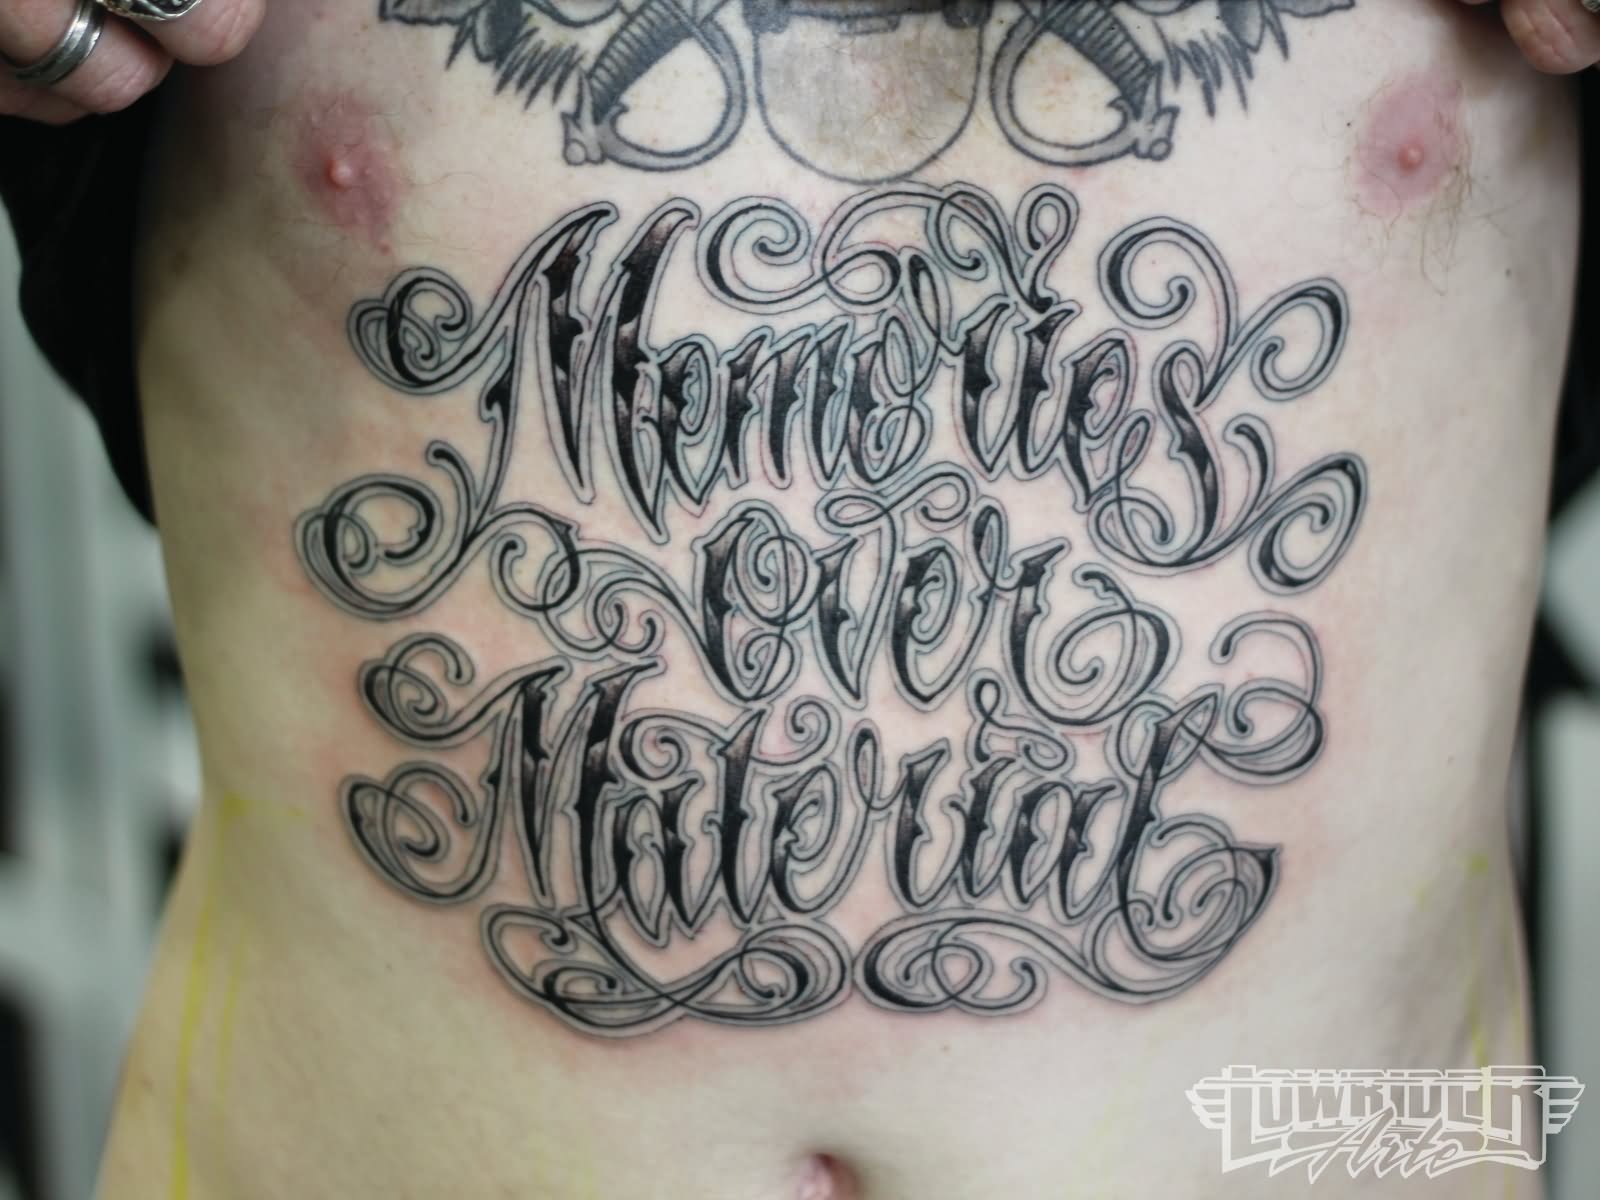 Memories Over Material Lettering Tattoo On Man Stomach